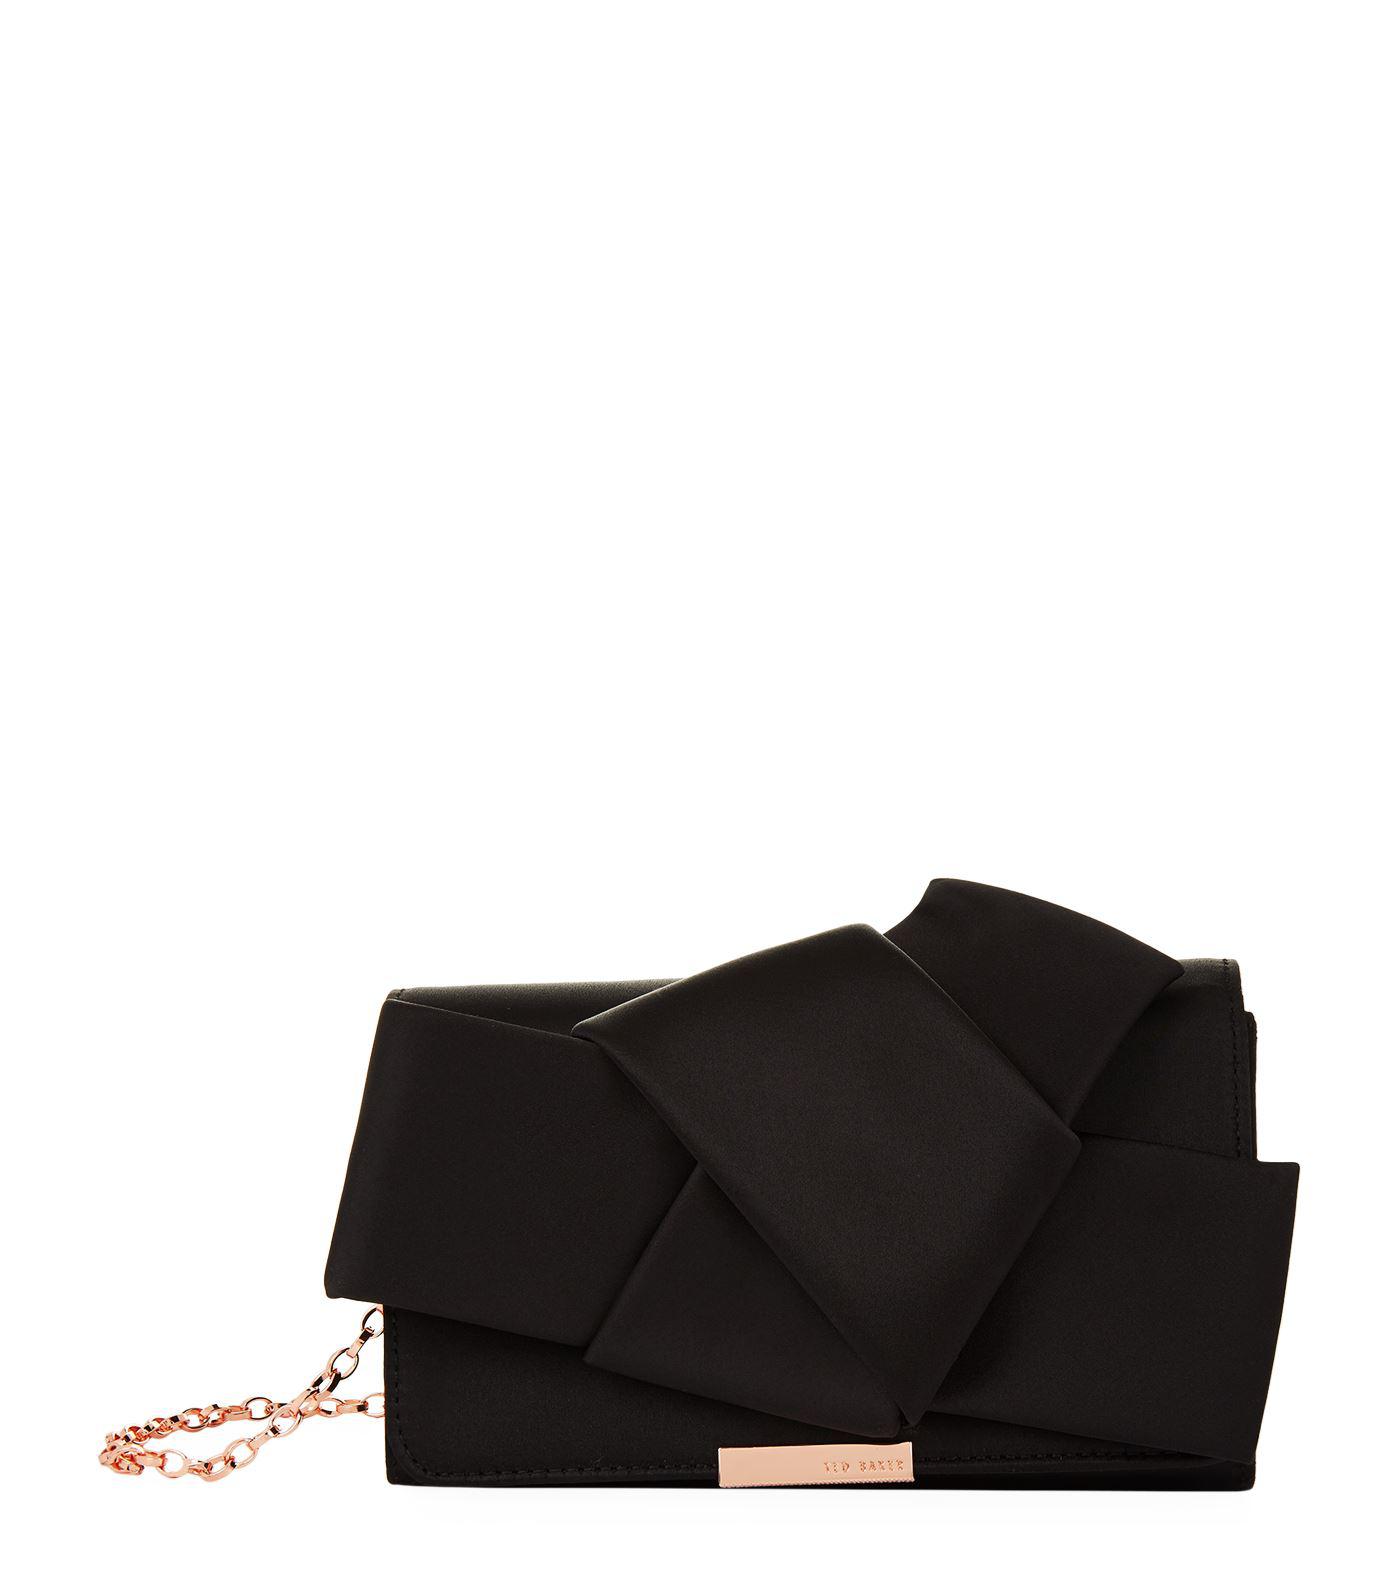 Ted Baker Bow Clutch Outlet, SAVE mpgc.net